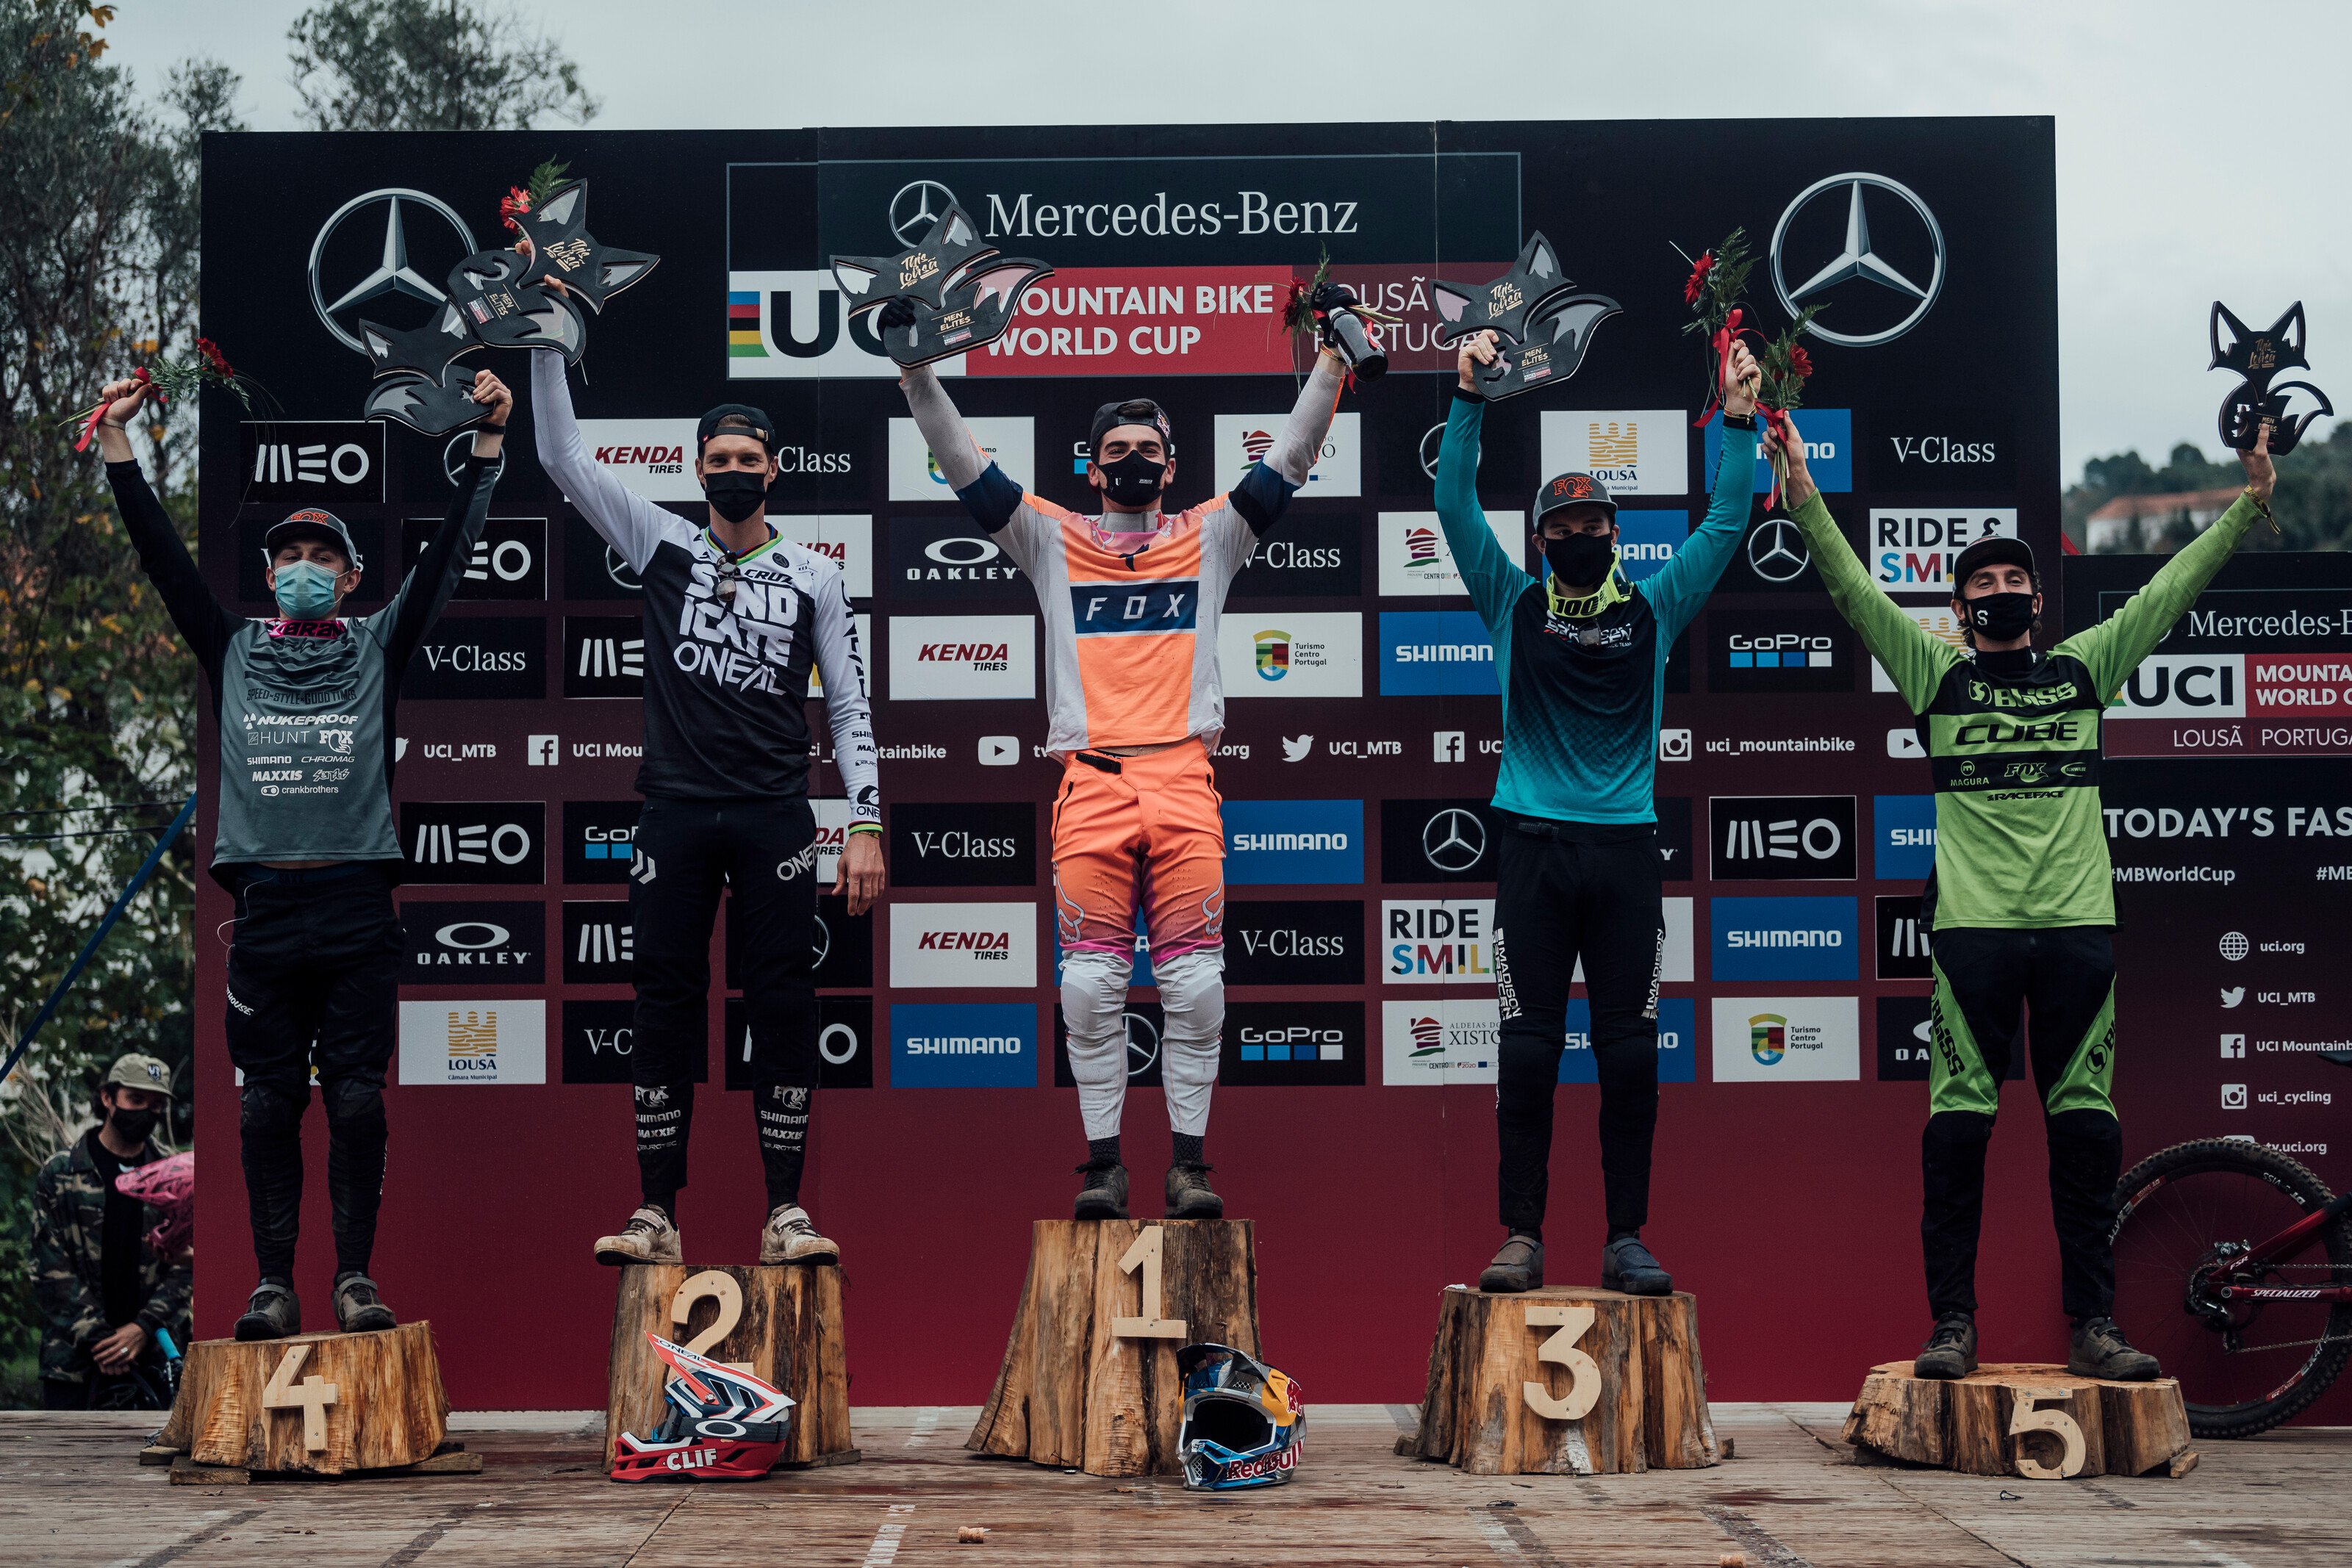 The final podium of 2020, Lousã DH World Cup